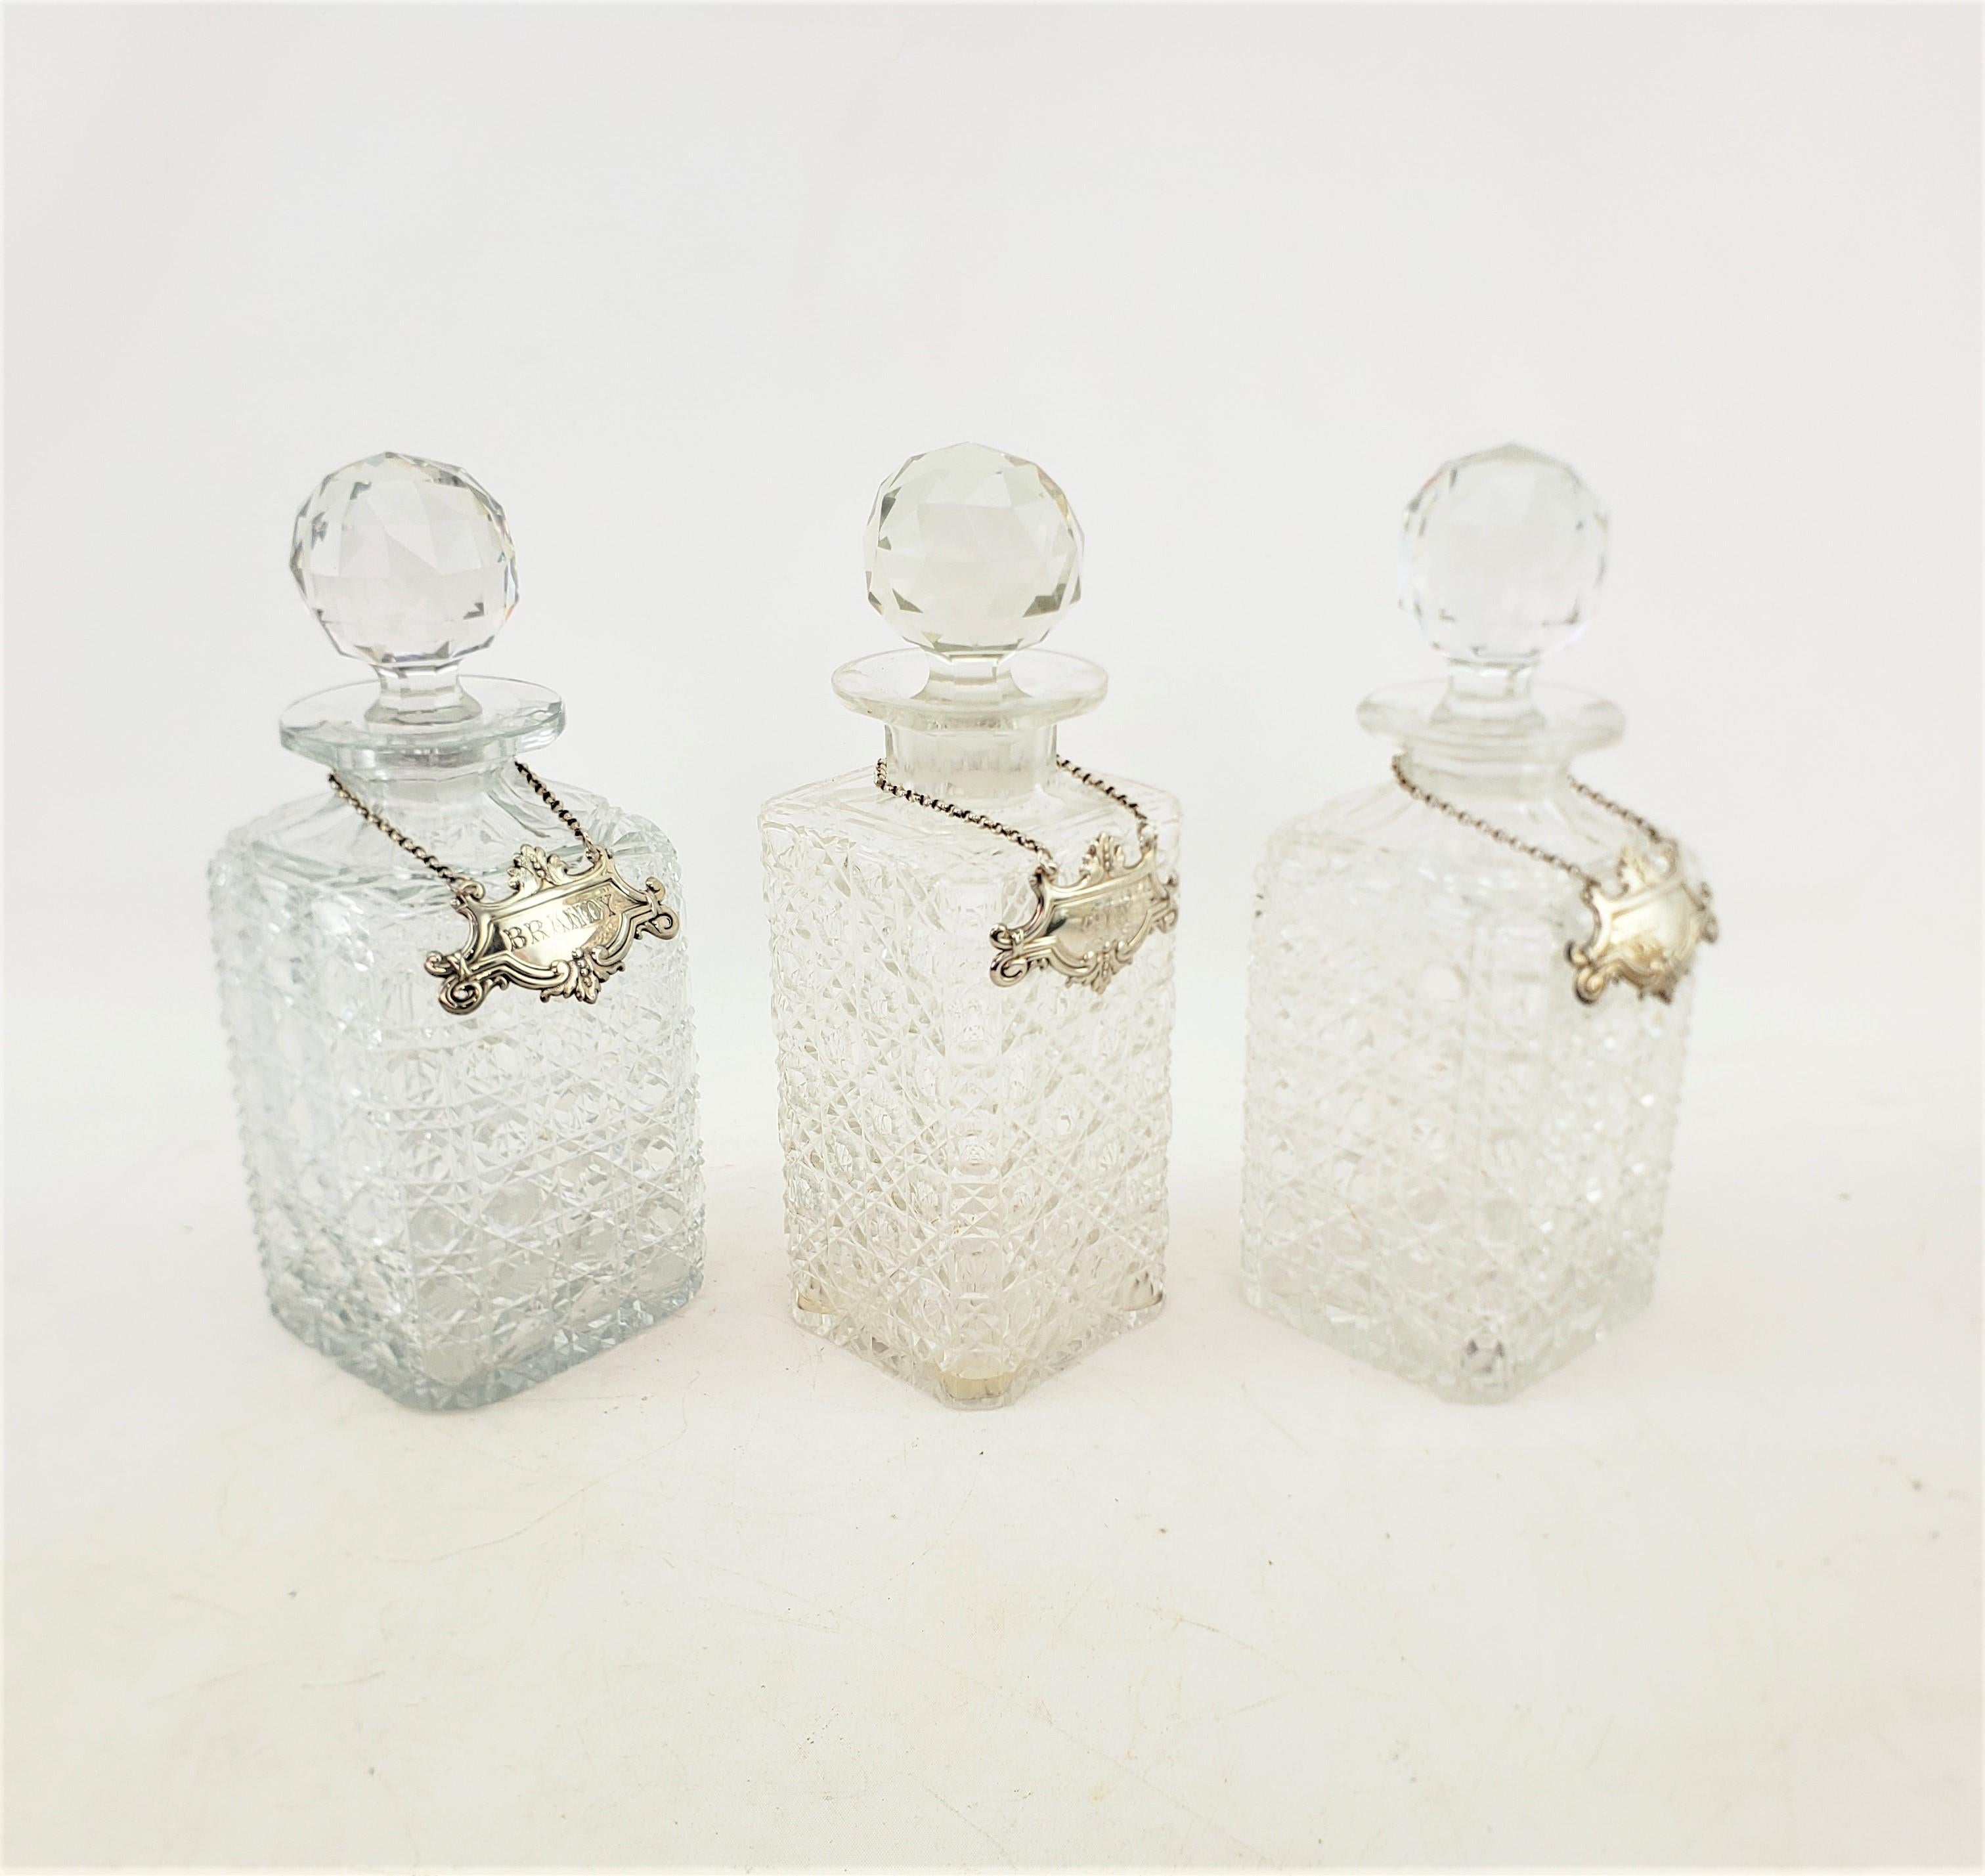 Antique Edwardian English Silver Plated & Cut Crystal 3 Bottle Tantalus and Key For Sale 5